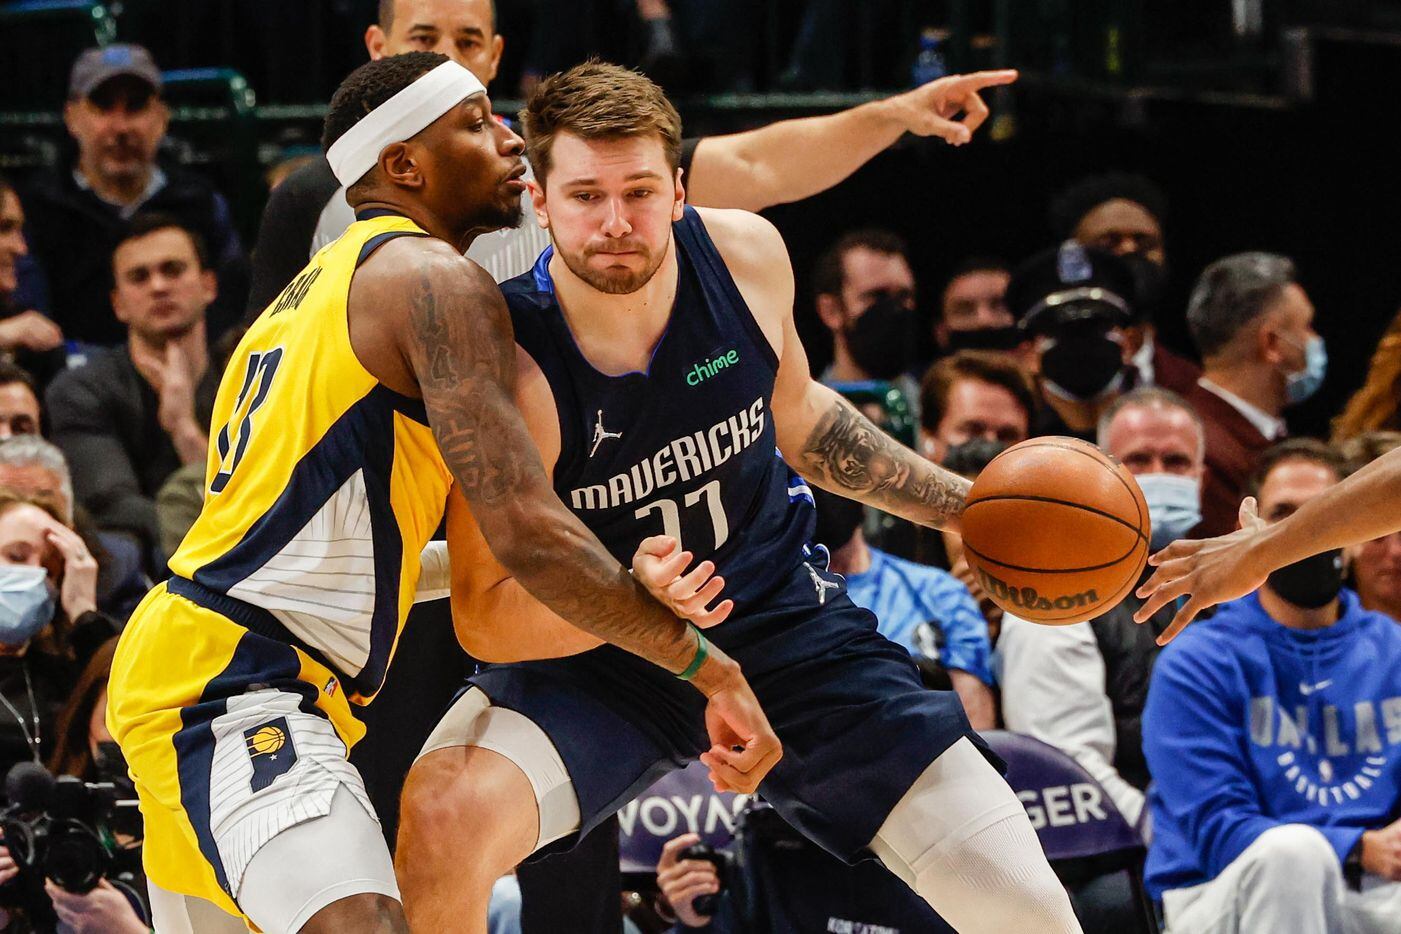 Dallas Mavericks guard Luka Doncic (77) drives to the basket as Indiana Pacers forward Torrey Craig (13) tries to block him during the first half at the American Airlines Center in Dallas on Saturday, January 29, 2022.